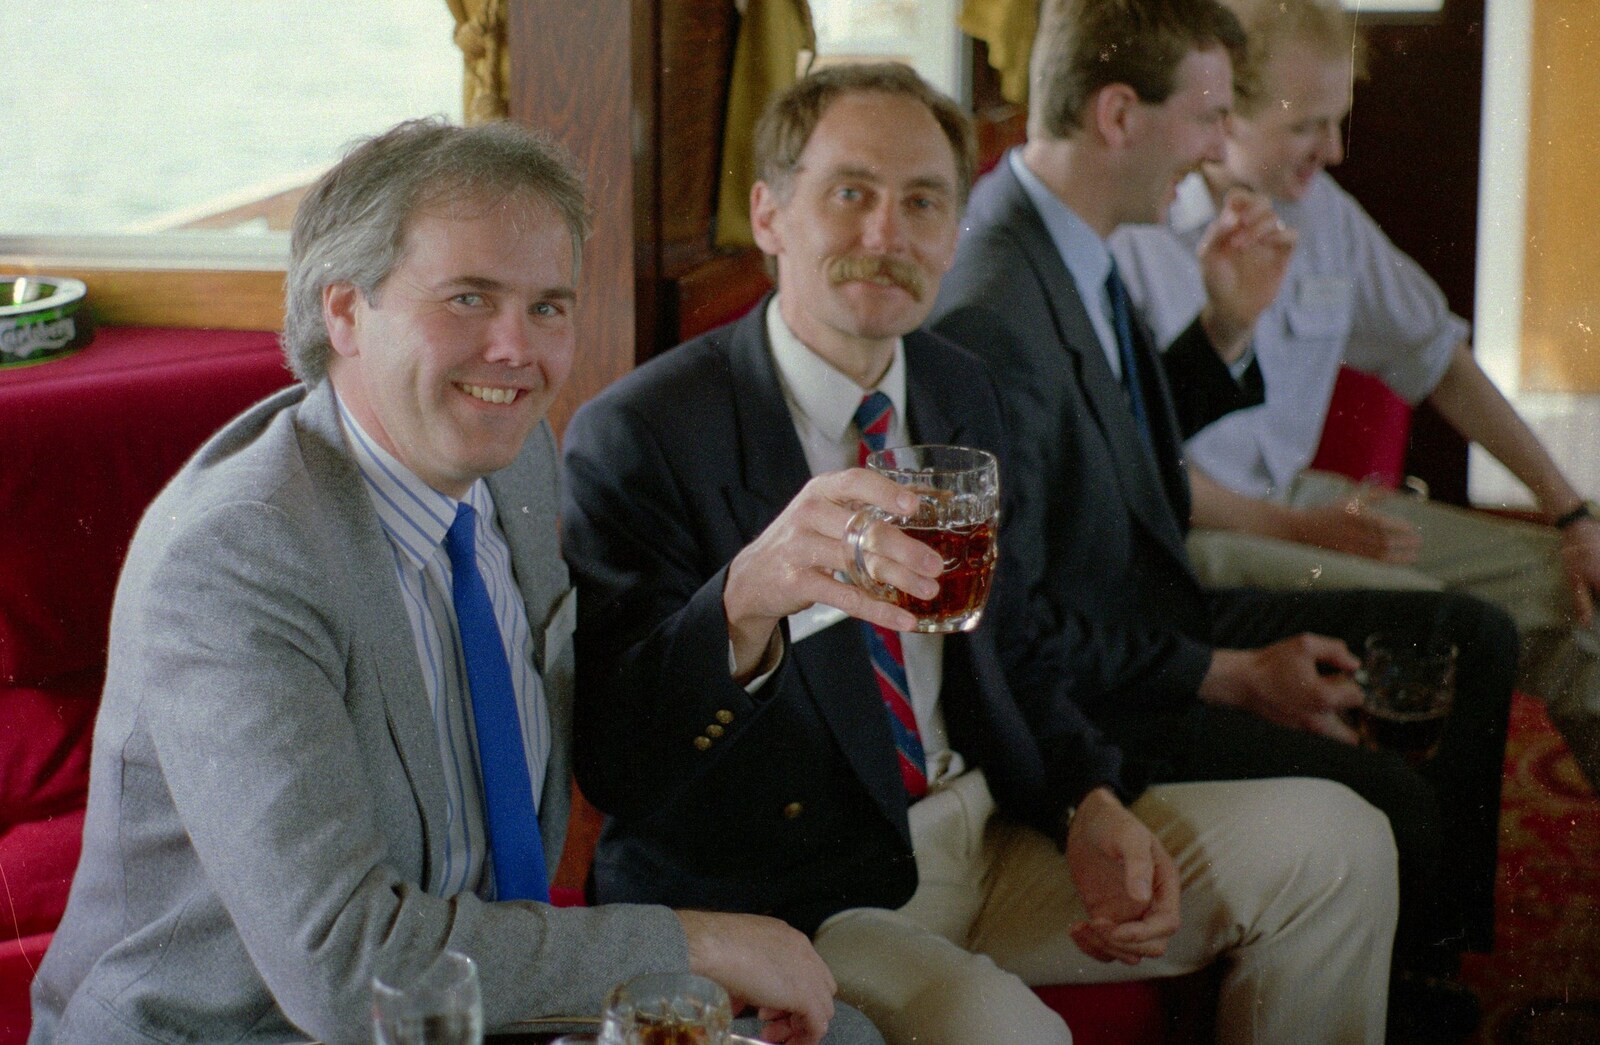 Alan Smith and some other dude from A Soman-Wherry Press Boat Trip, Horning, The Broads, Norfolk - 8th May 1988